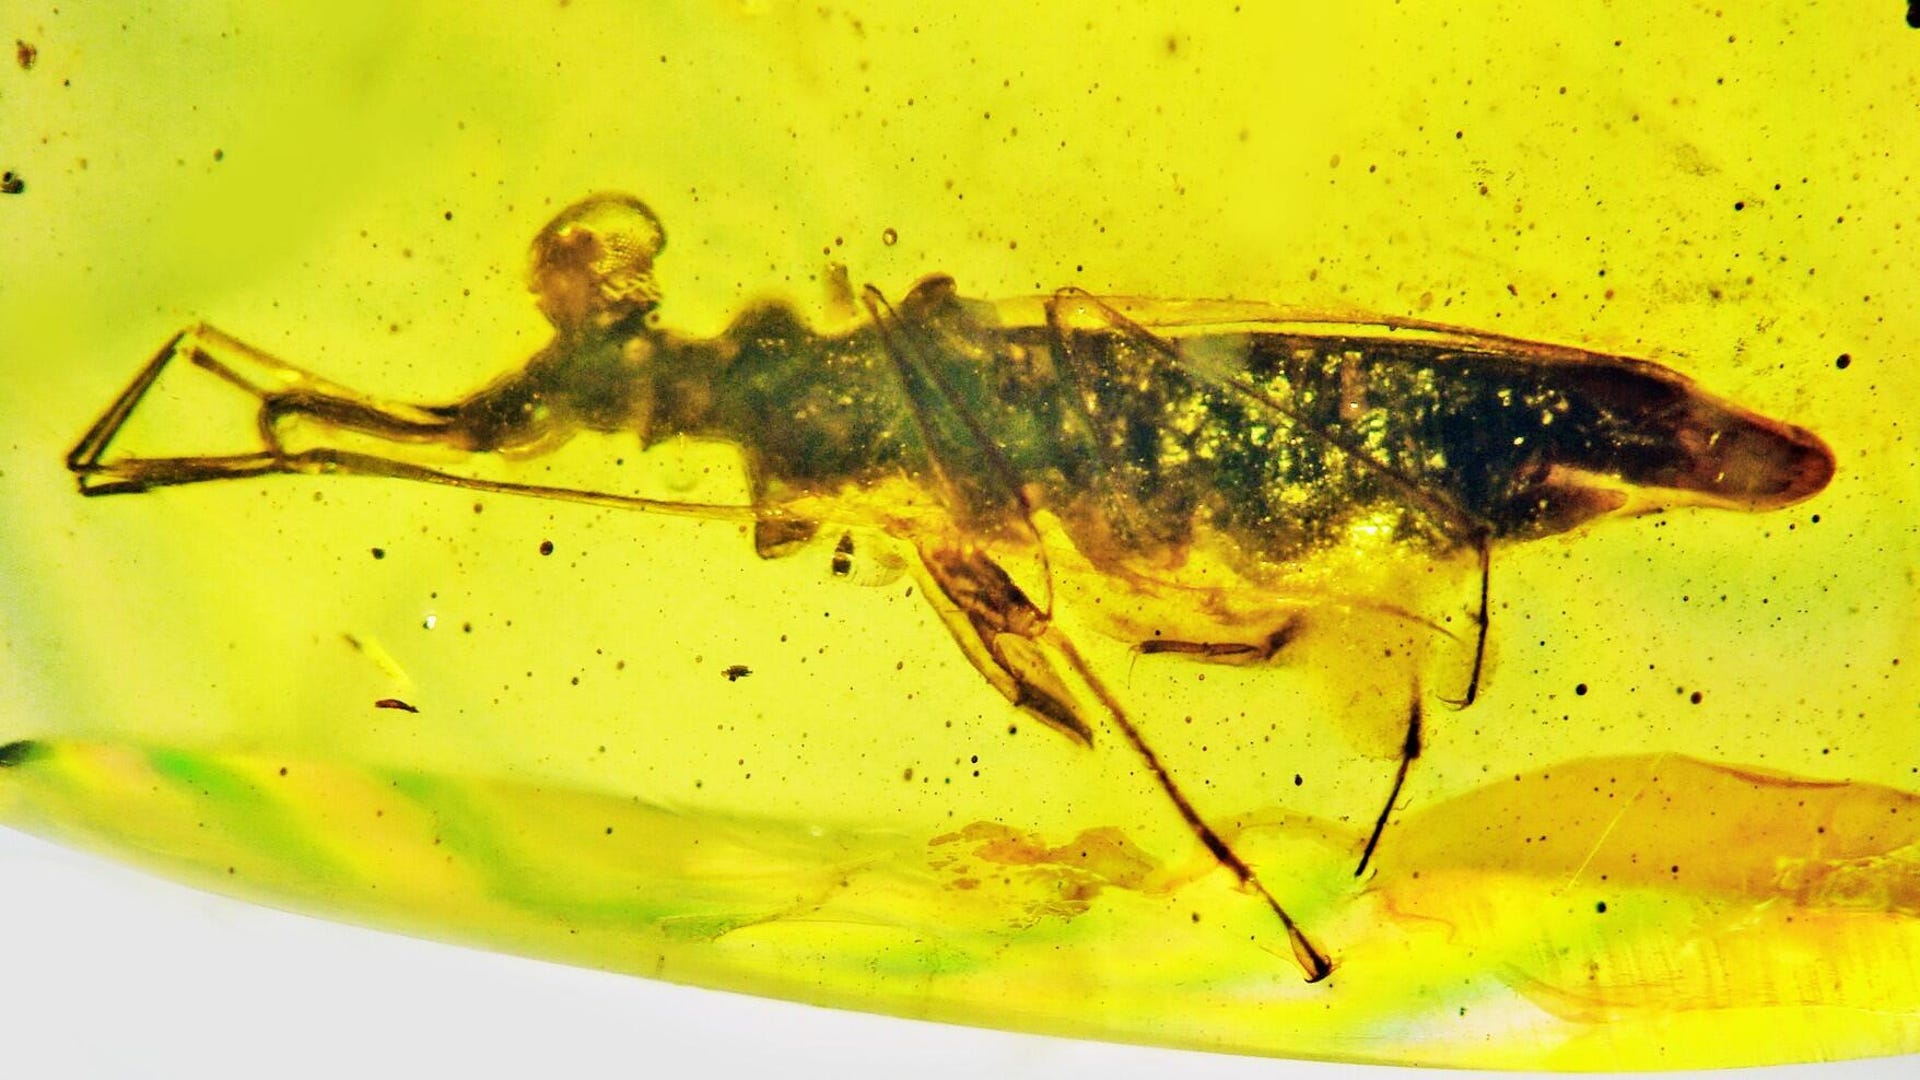 Sideways look at a bug trapped in amber. The bug, brown against a yellow backdrop, is elongated with a bulging eye.